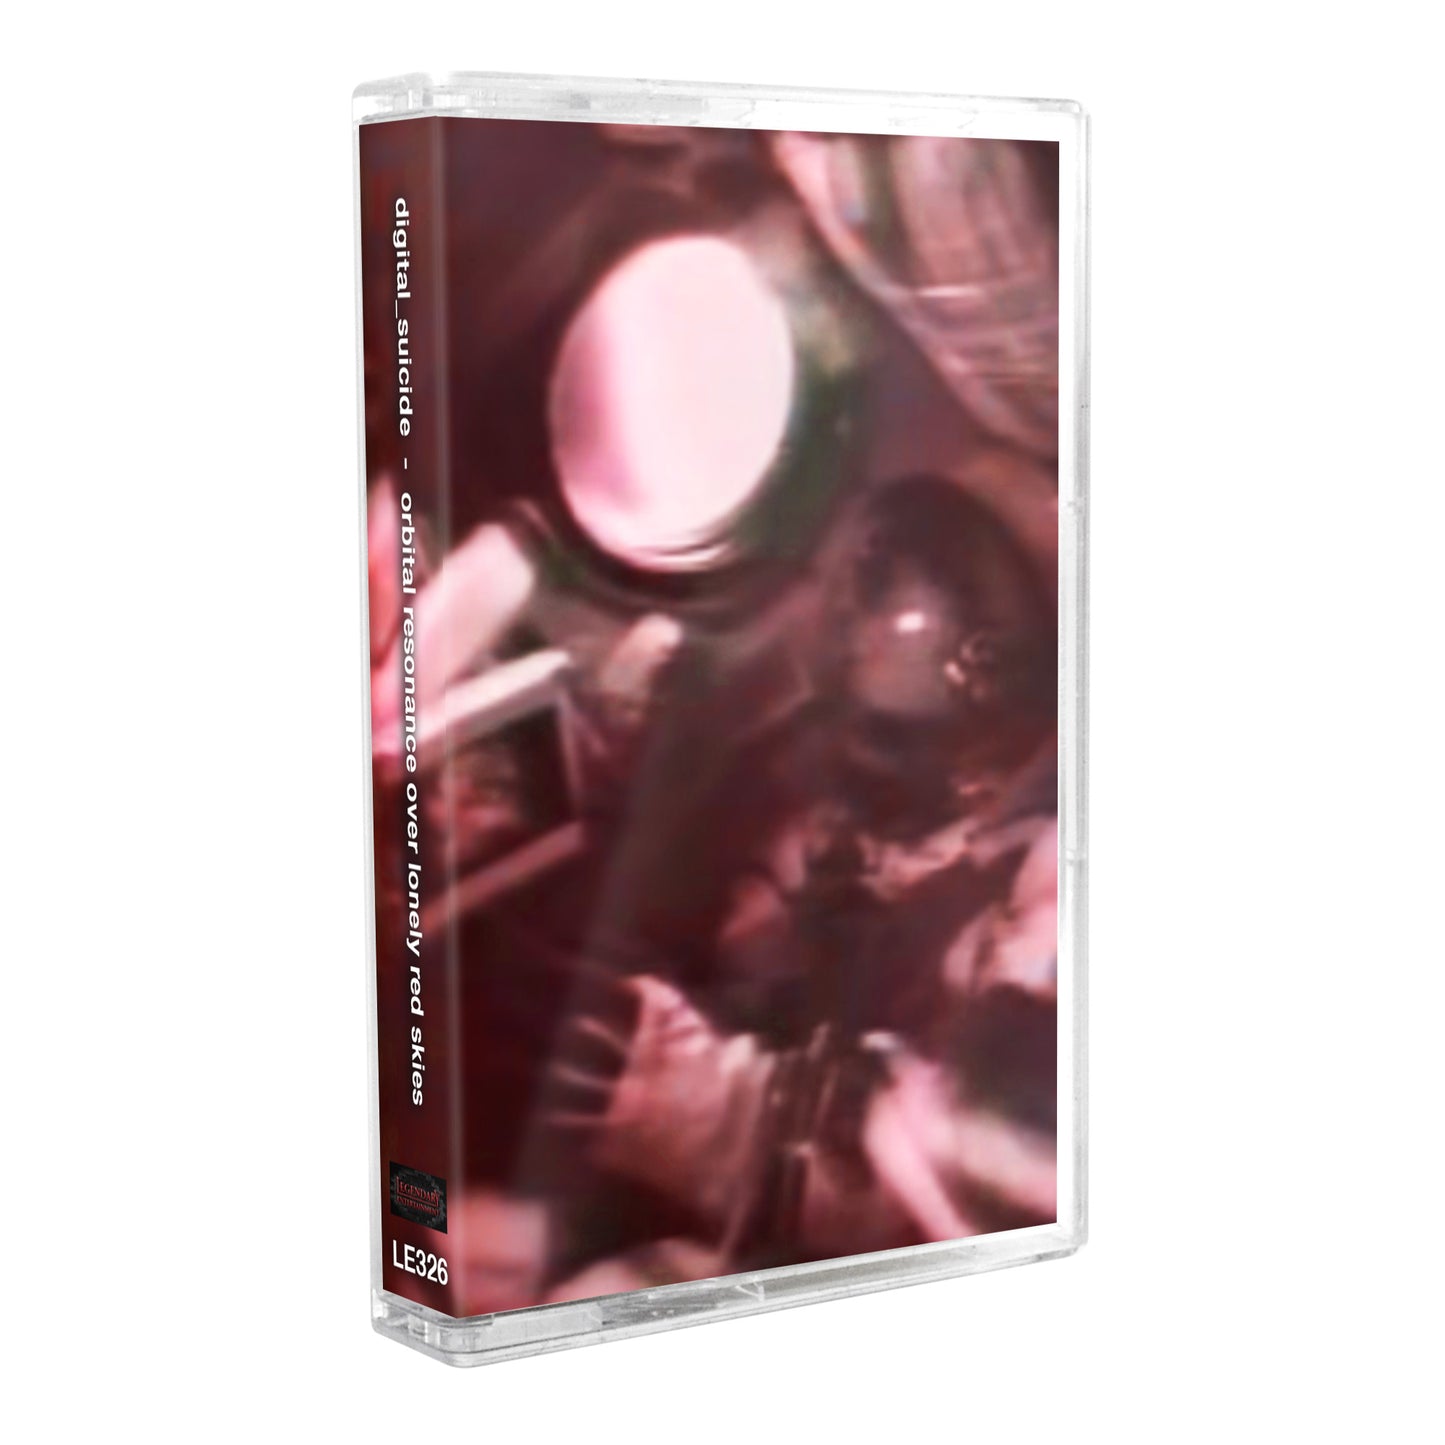 digital_suicide - "orbital resonance over lonely red skies" Limited Edition Cassette Tape